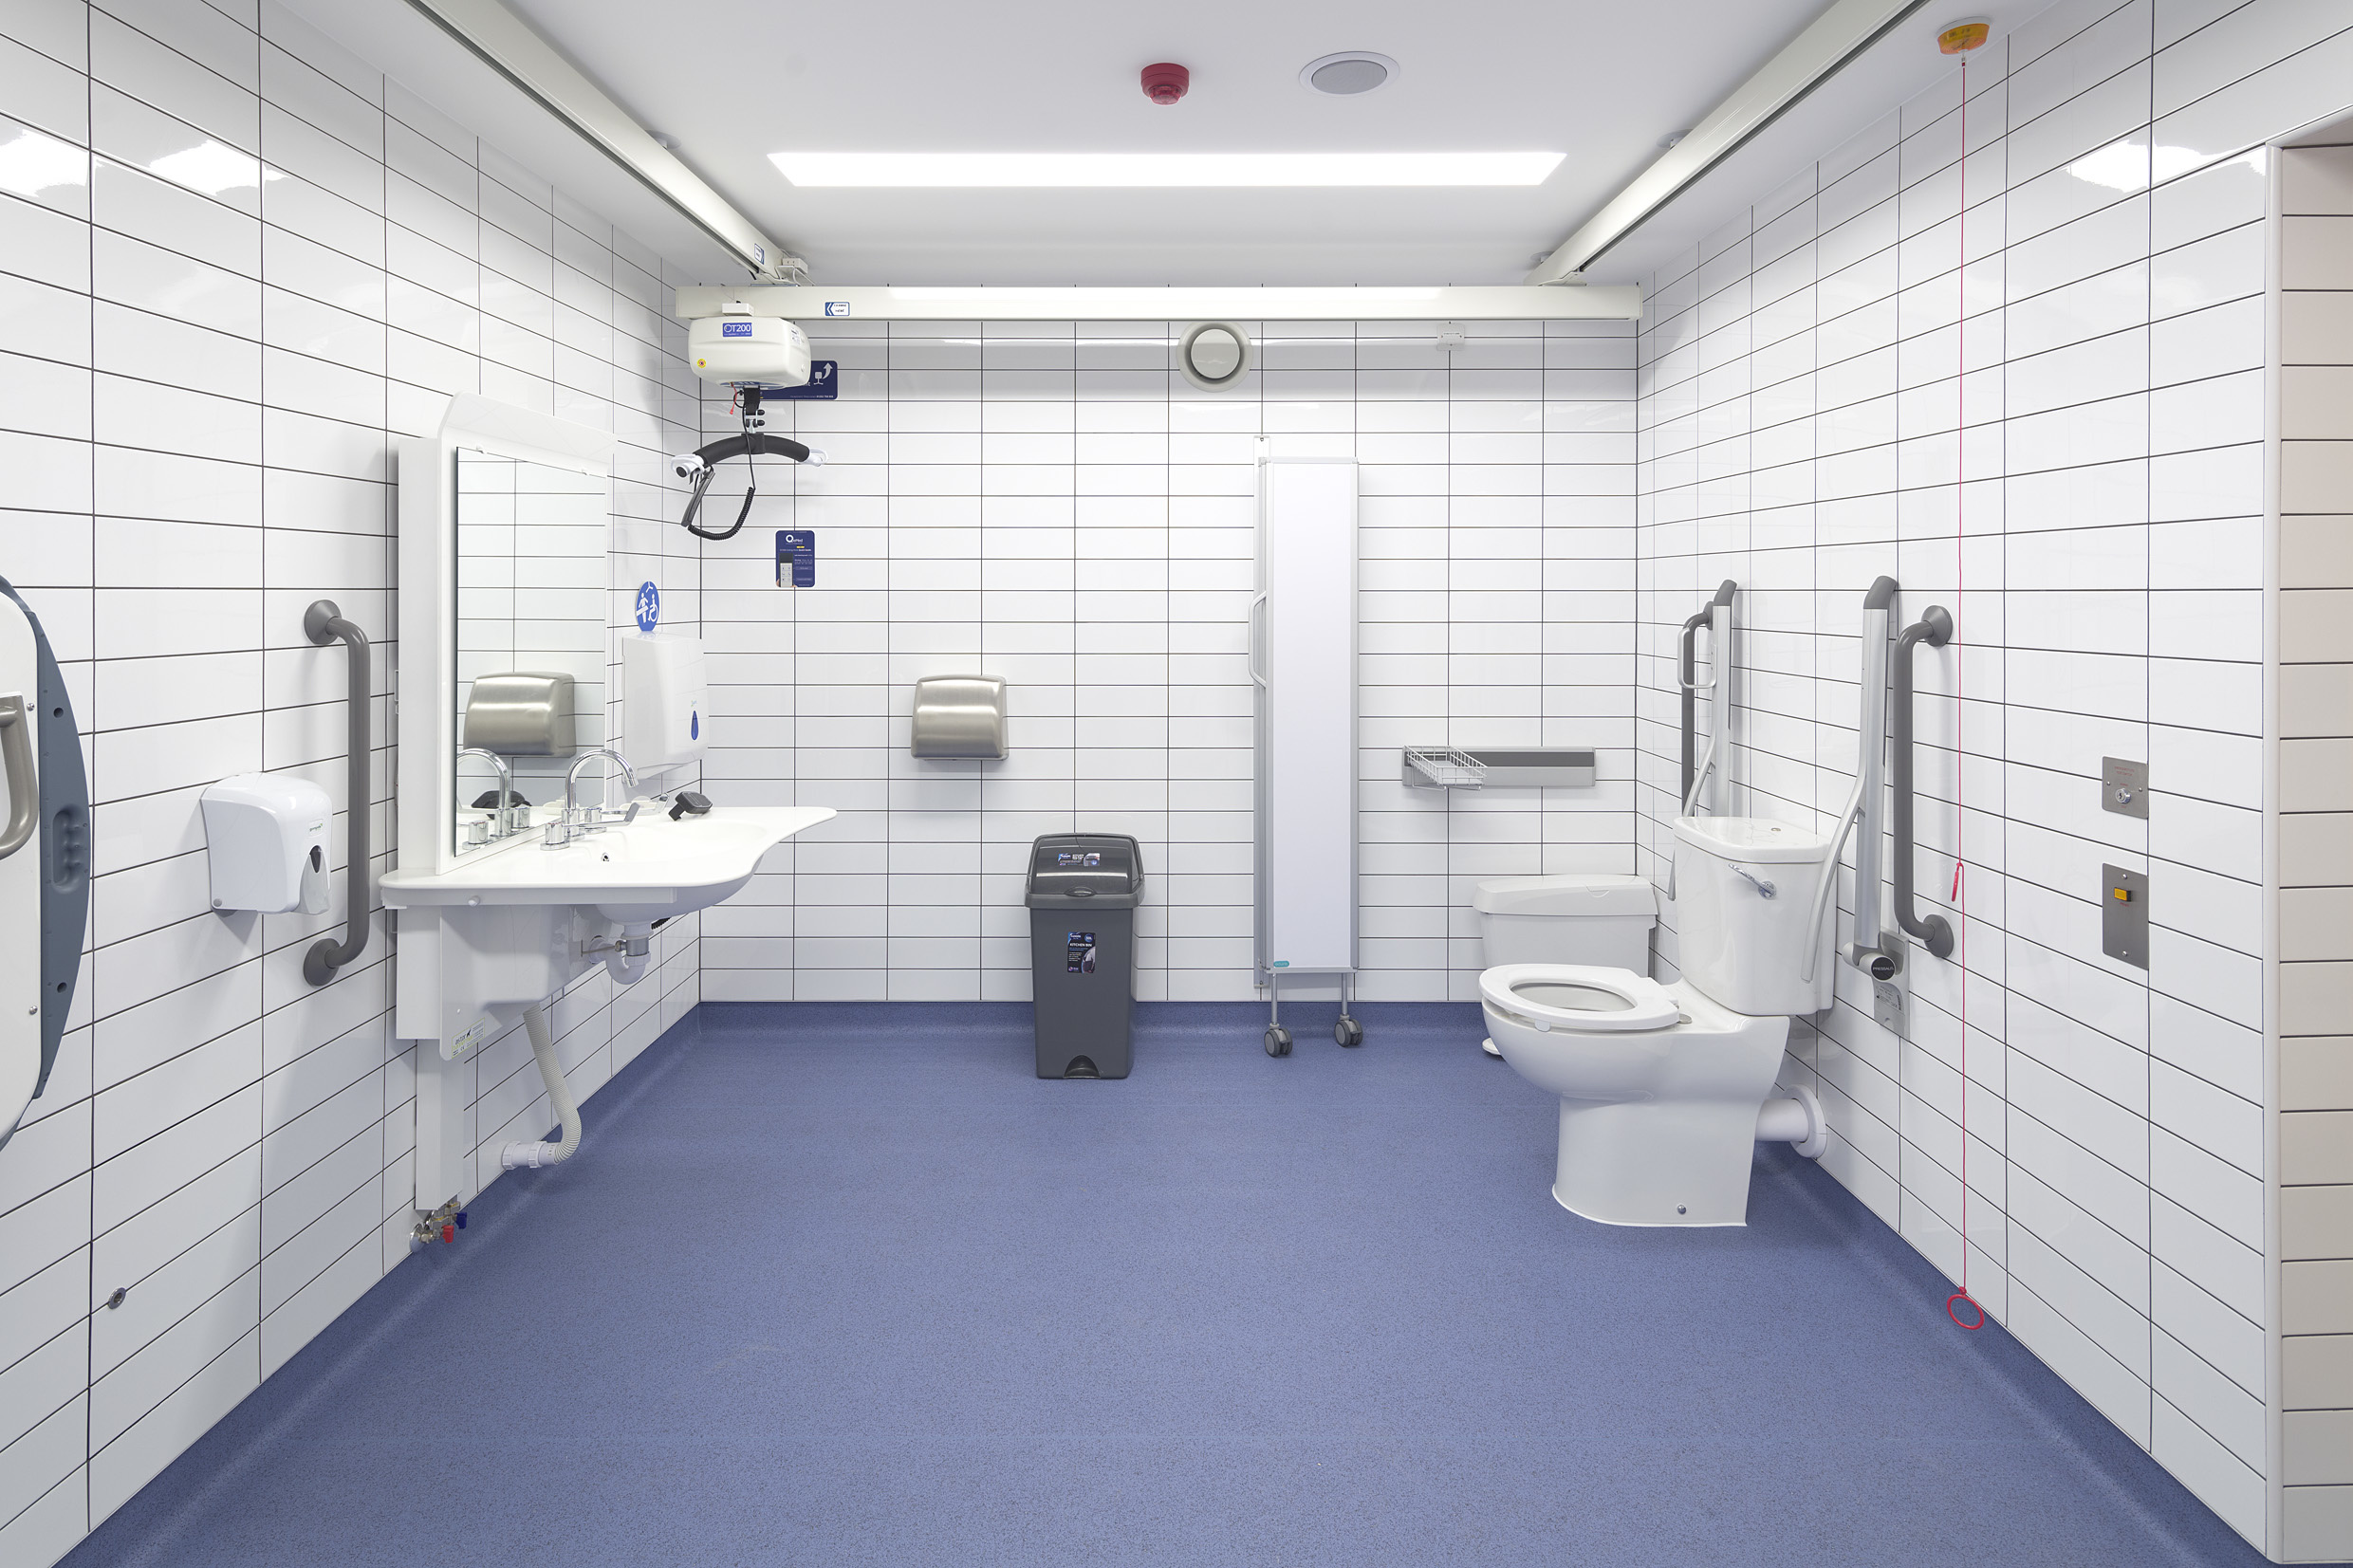 Example of a Changing Places accessible toilet